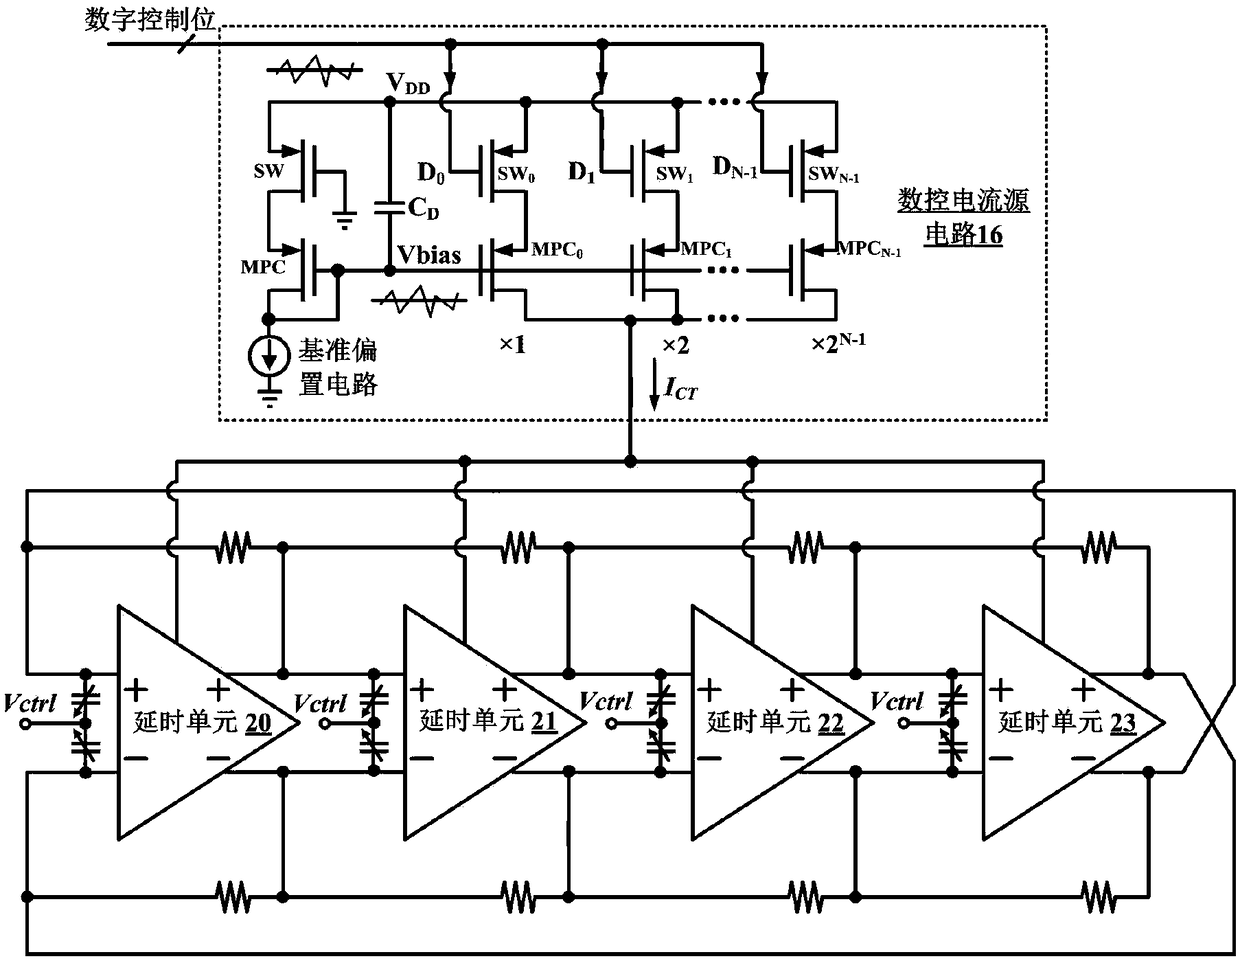 Low-power-consumption phase-locked loop frequency synthesizer